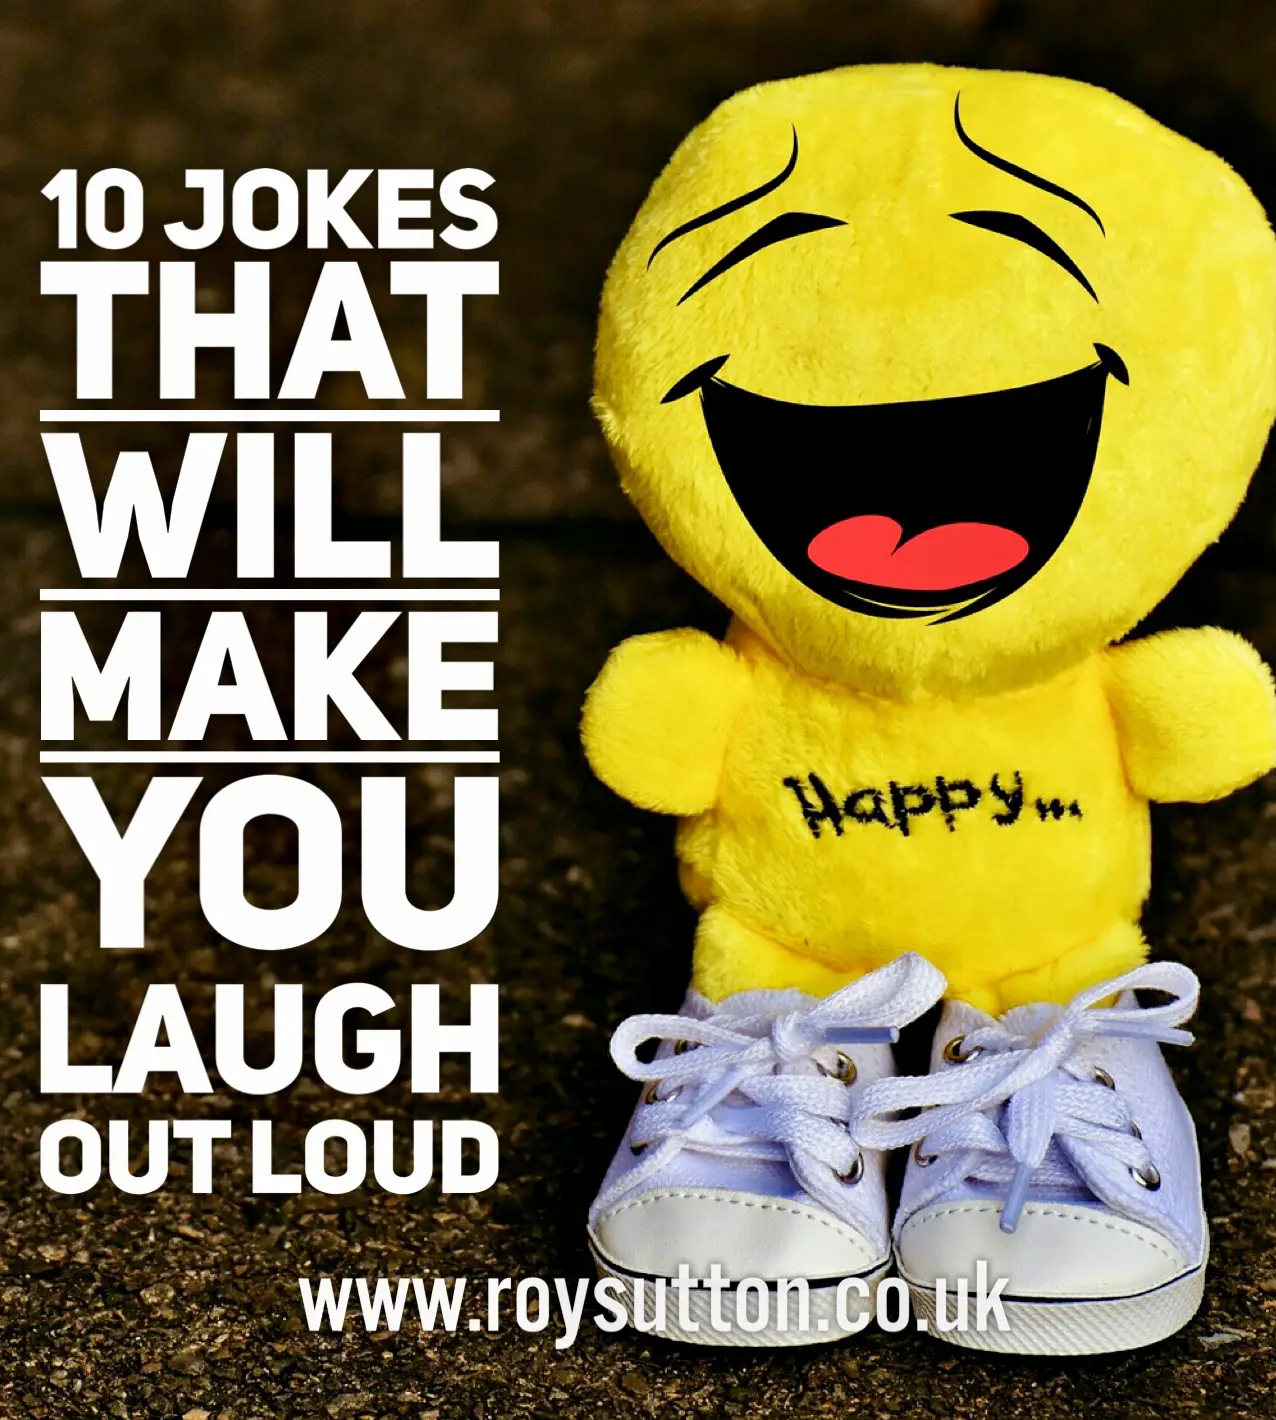 10 Jokes That Will Make You Laugh Out Loud Roy Sutton 49131 Hot Sex